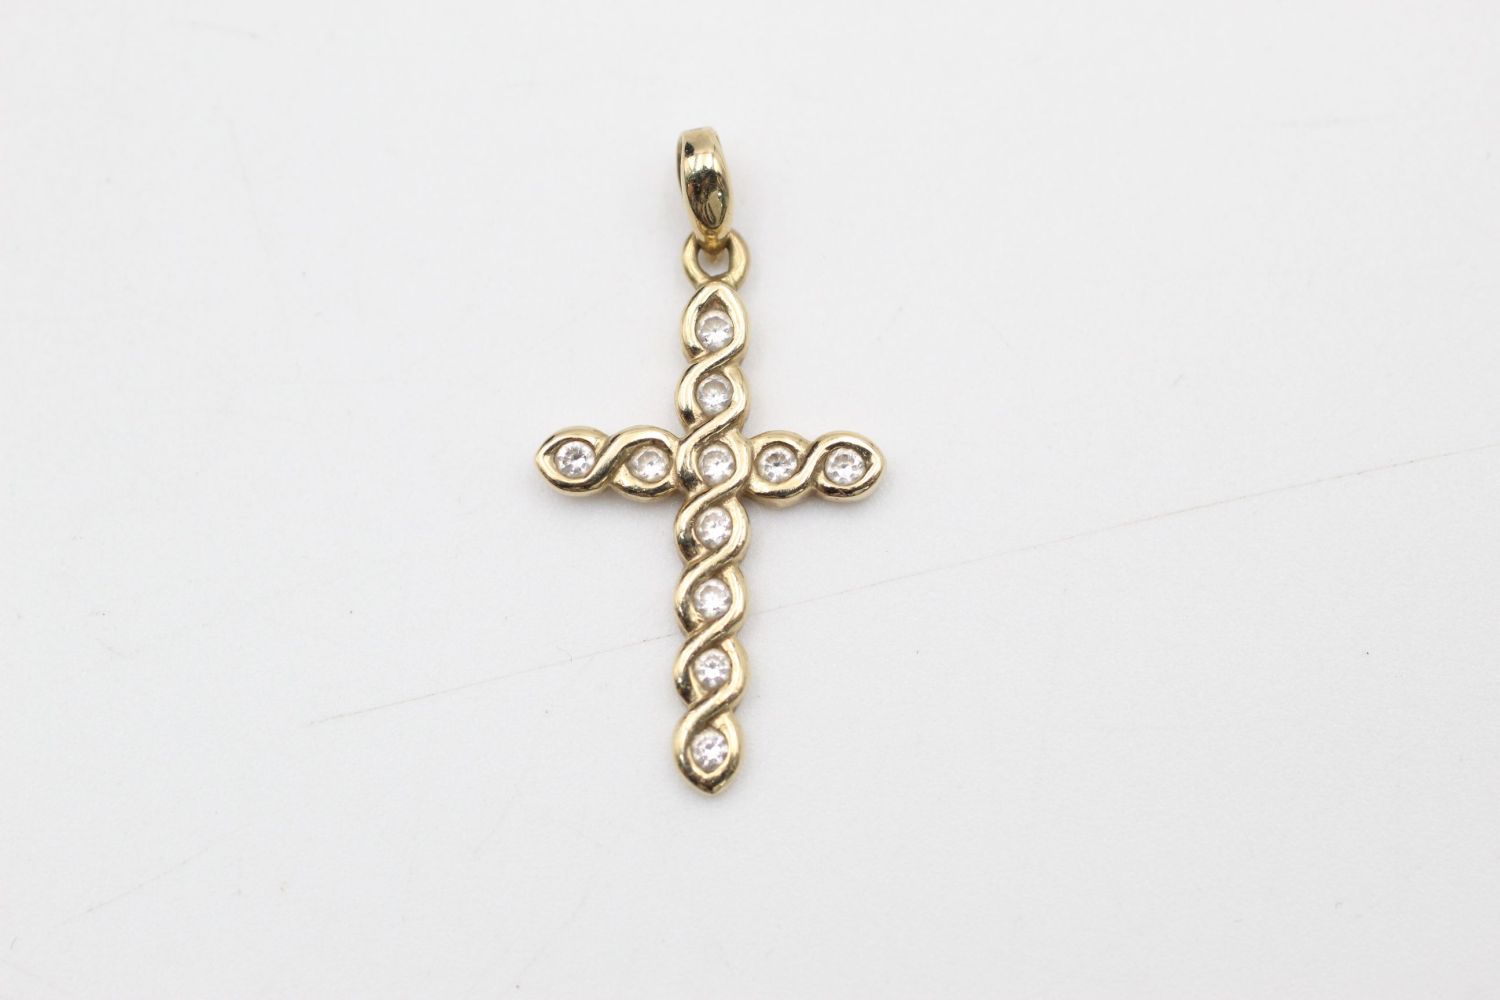 3 x 9ct Gold gemstone detail jewellery inc. cross, pendant, necklace 3 grams gross - Image 2 of 11